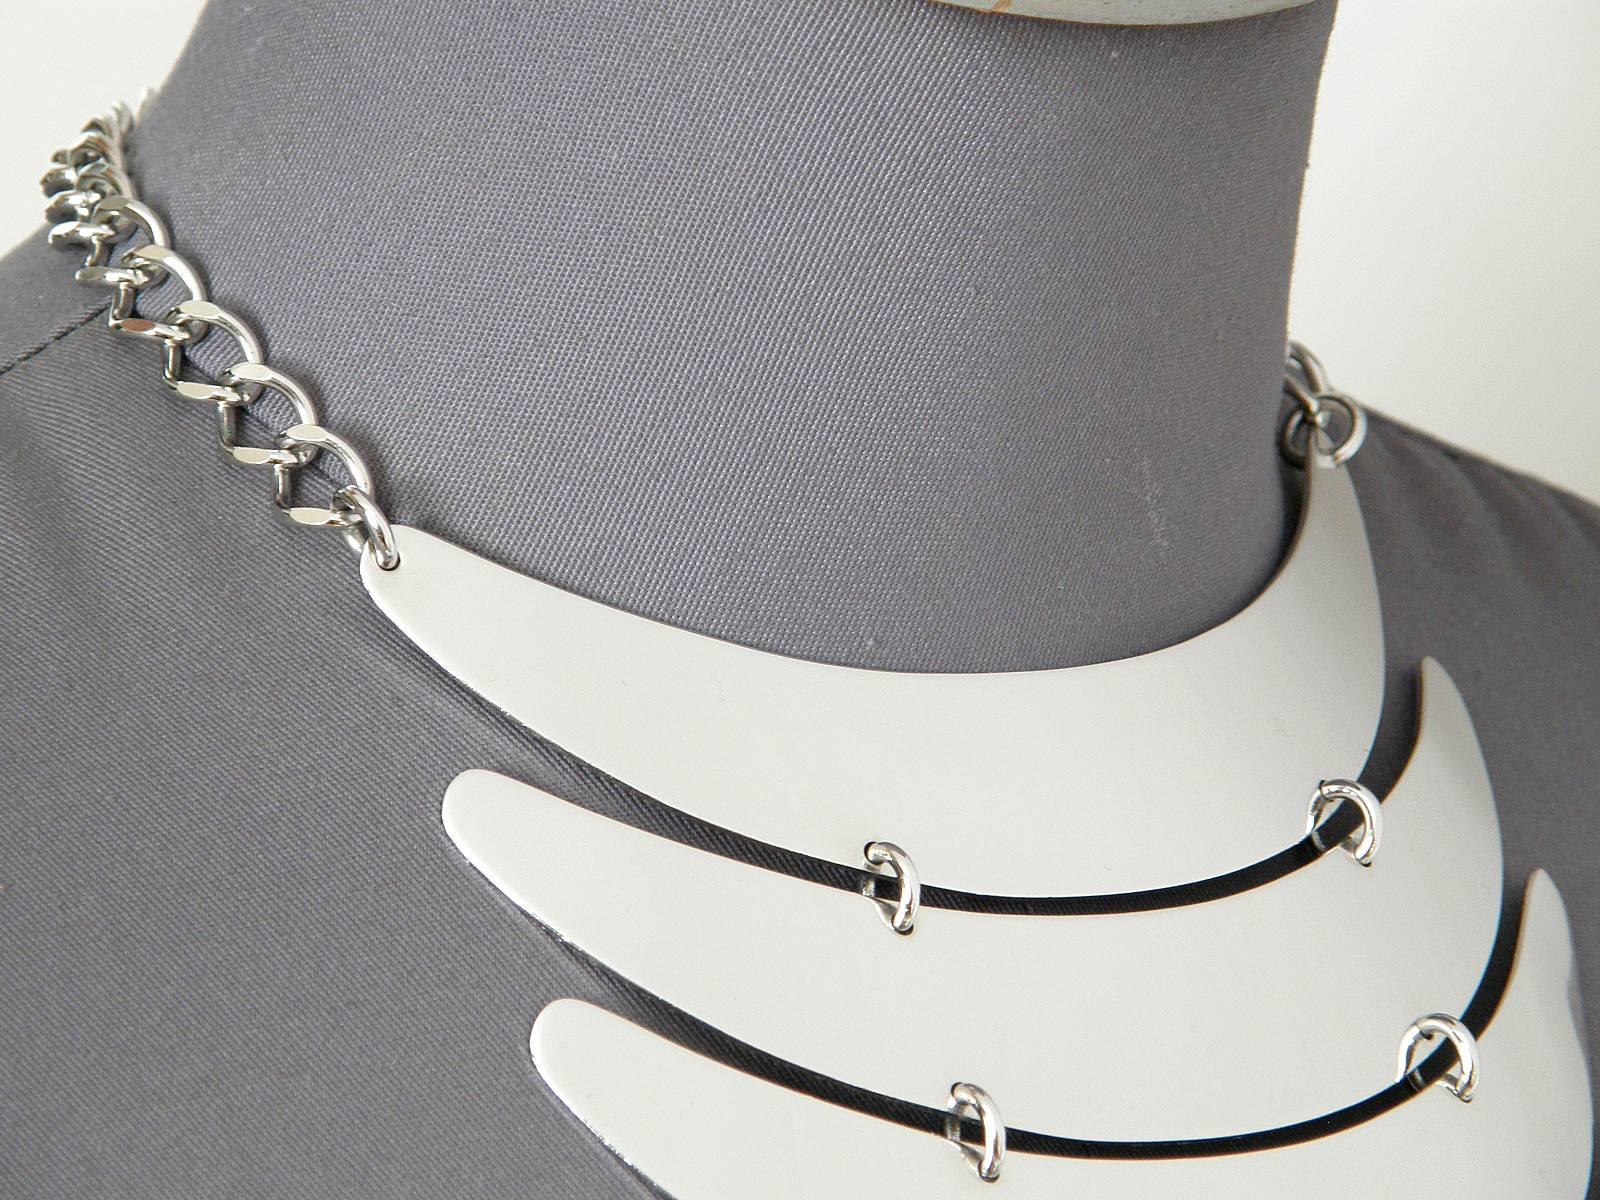 This modernist breastplate necklace is from a space age style line of jewelry by Trifari. It's constructed from five streamlined crescent shaped pieces of chrome plated metal that are hinged together. It has a great period look.

each plate measures